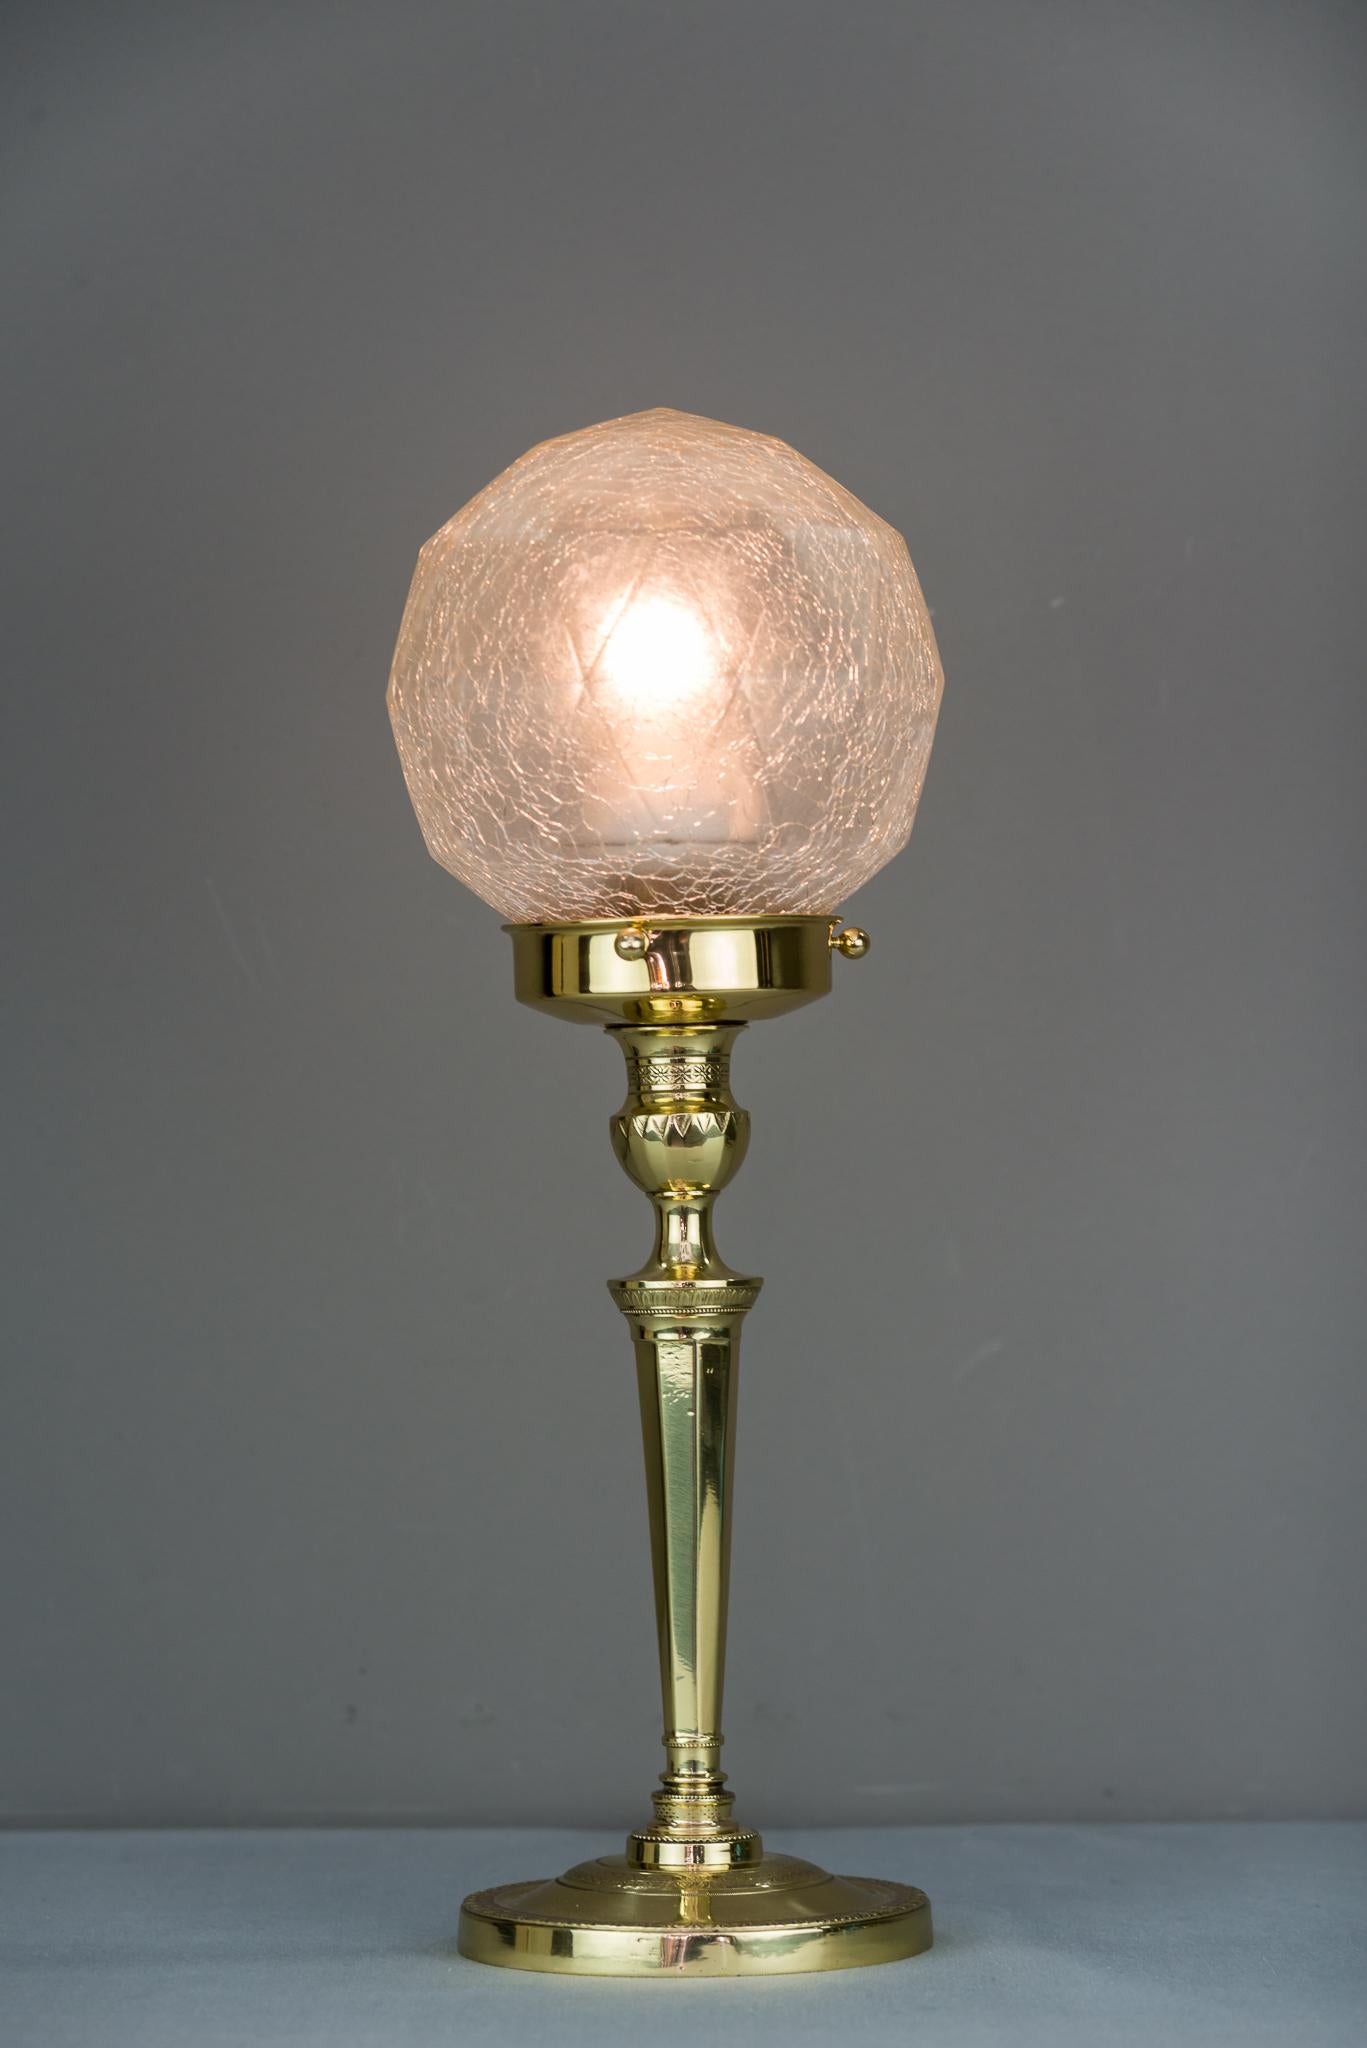 Lacquered Art Deco Table Lamp with Original Glass Shade, circa 1920s